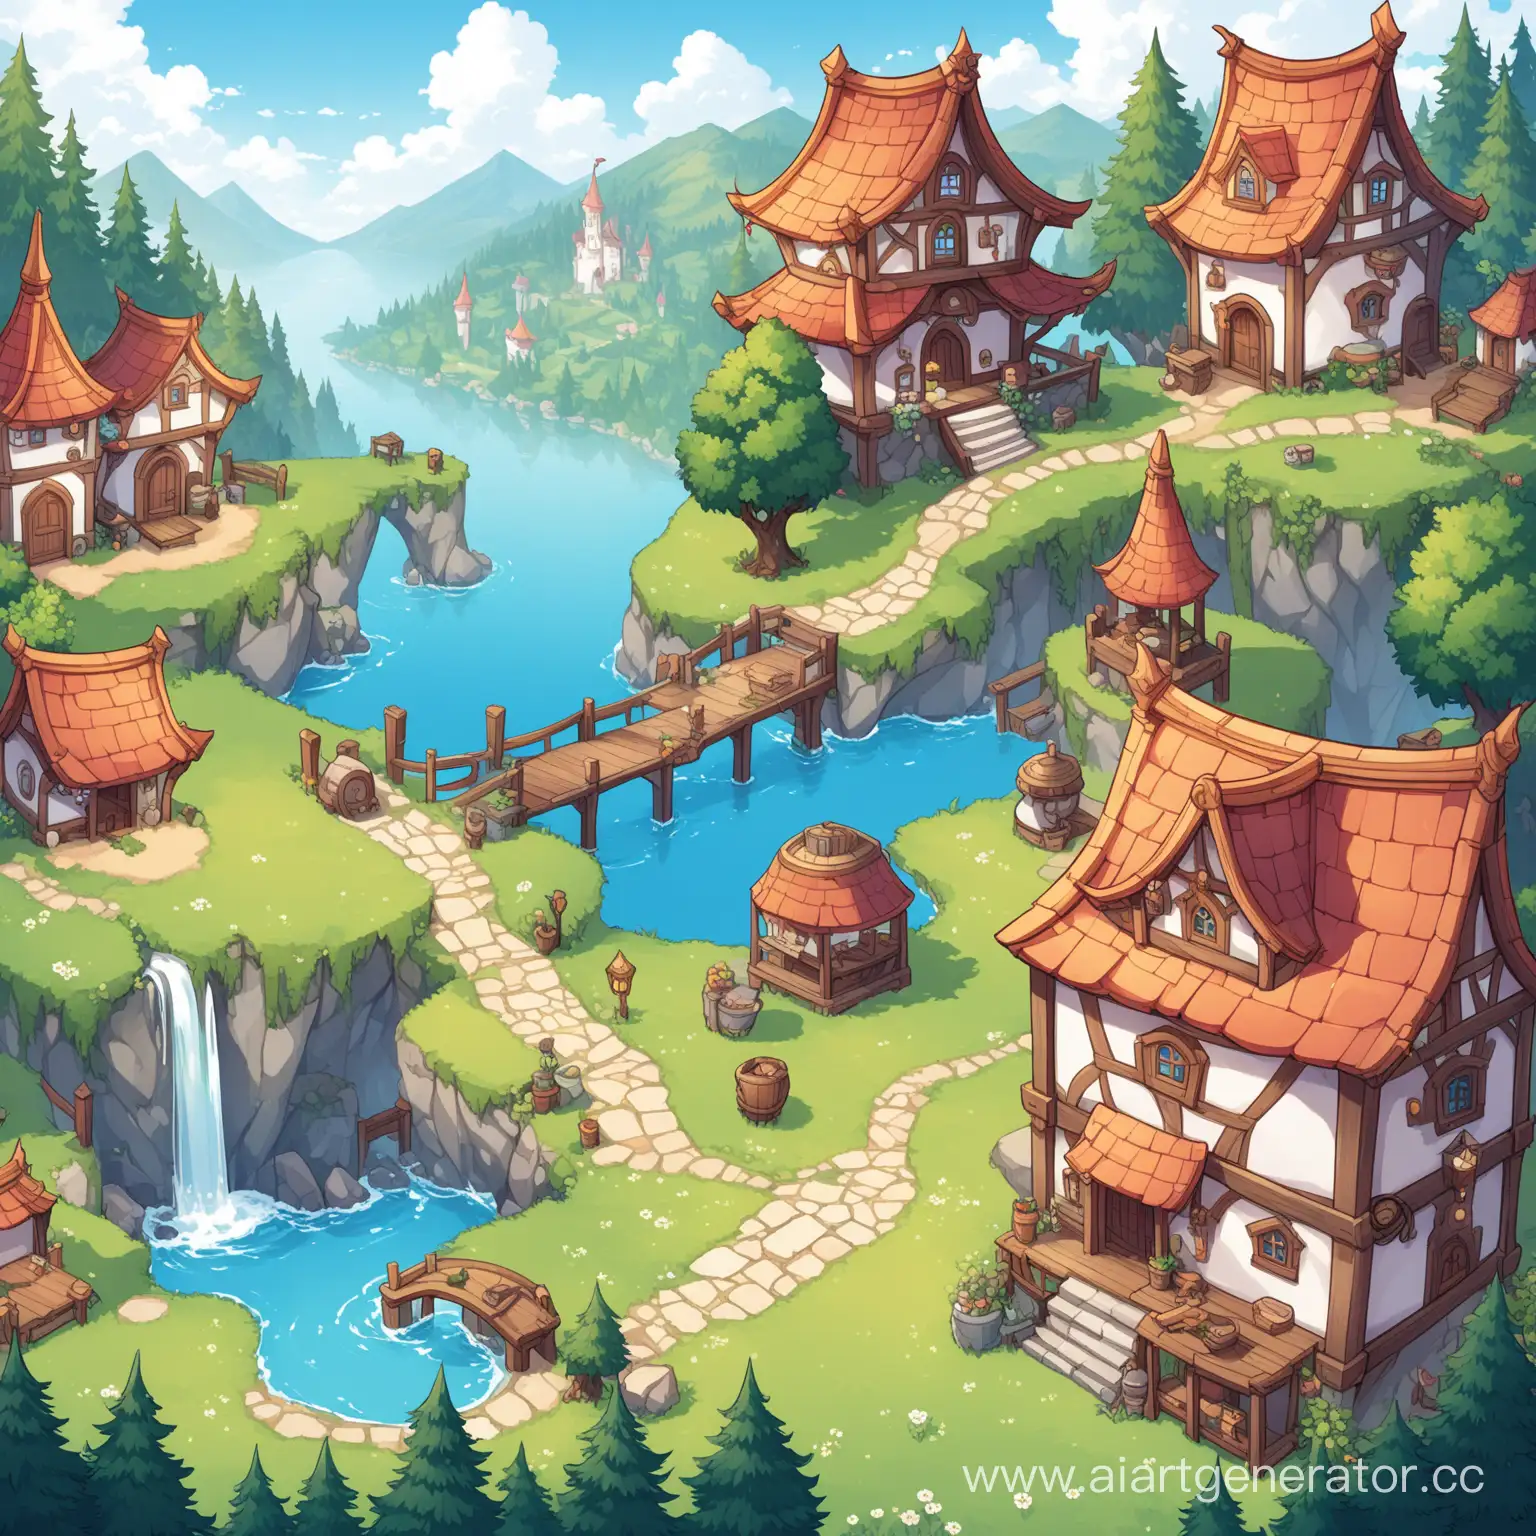 Game locations for a game called Tiny tale